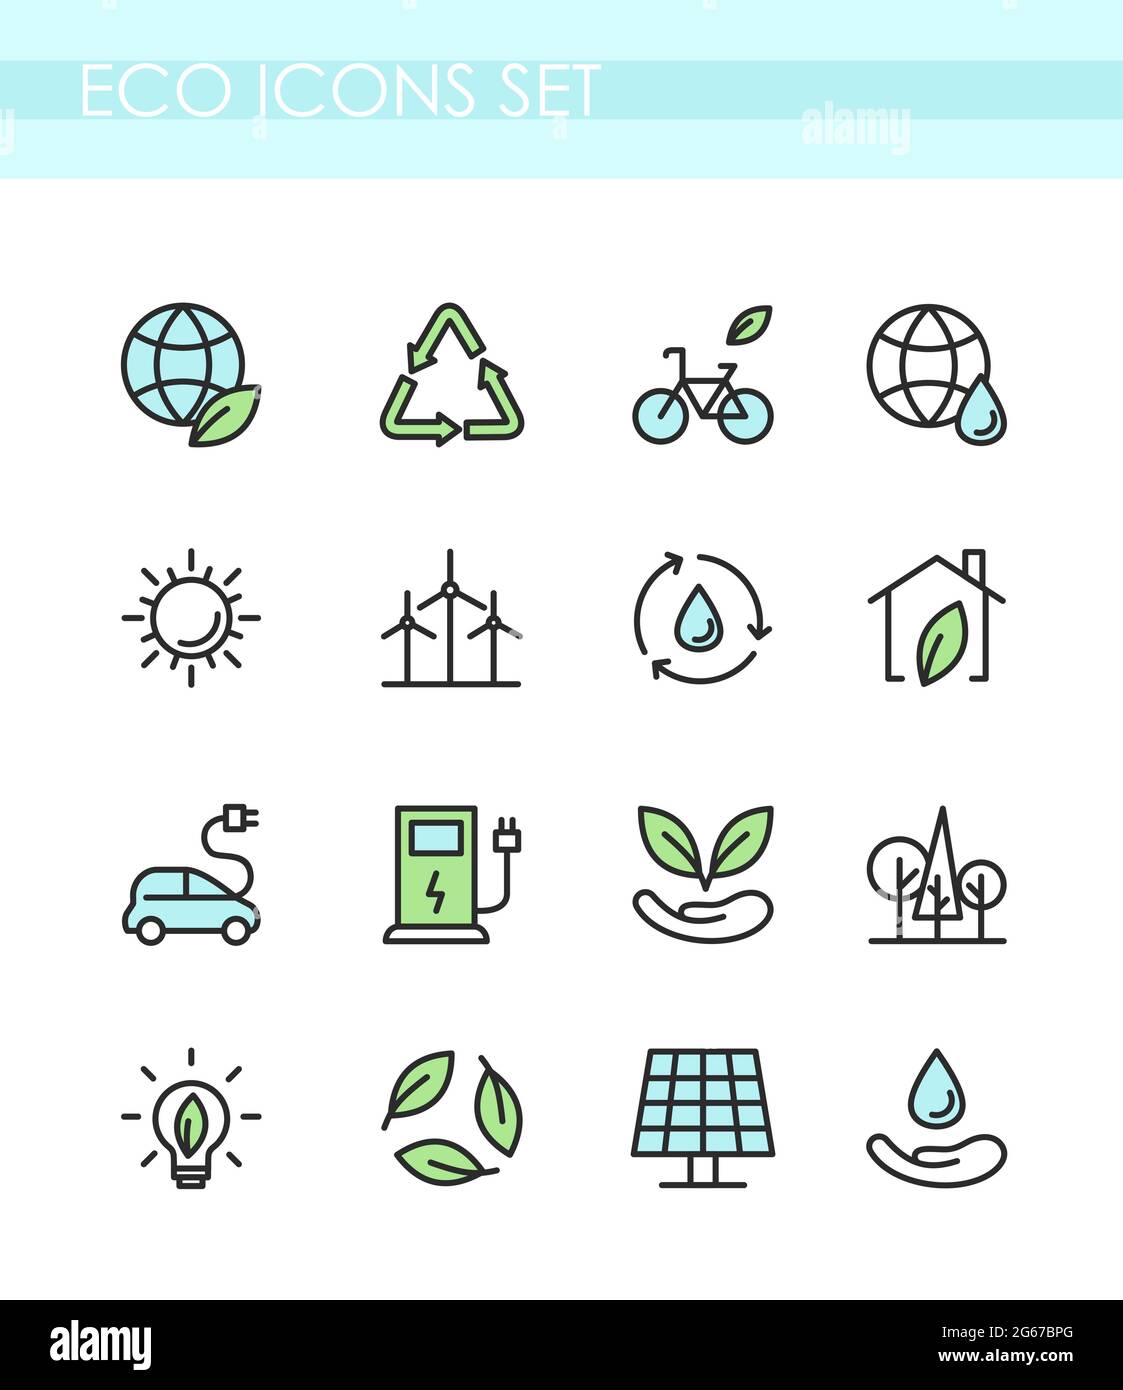 Vector illustration set of eco icons. Ecology concept, green technology, organic, healthy lifestyle, alternative energy, electrocar. Stock Vector